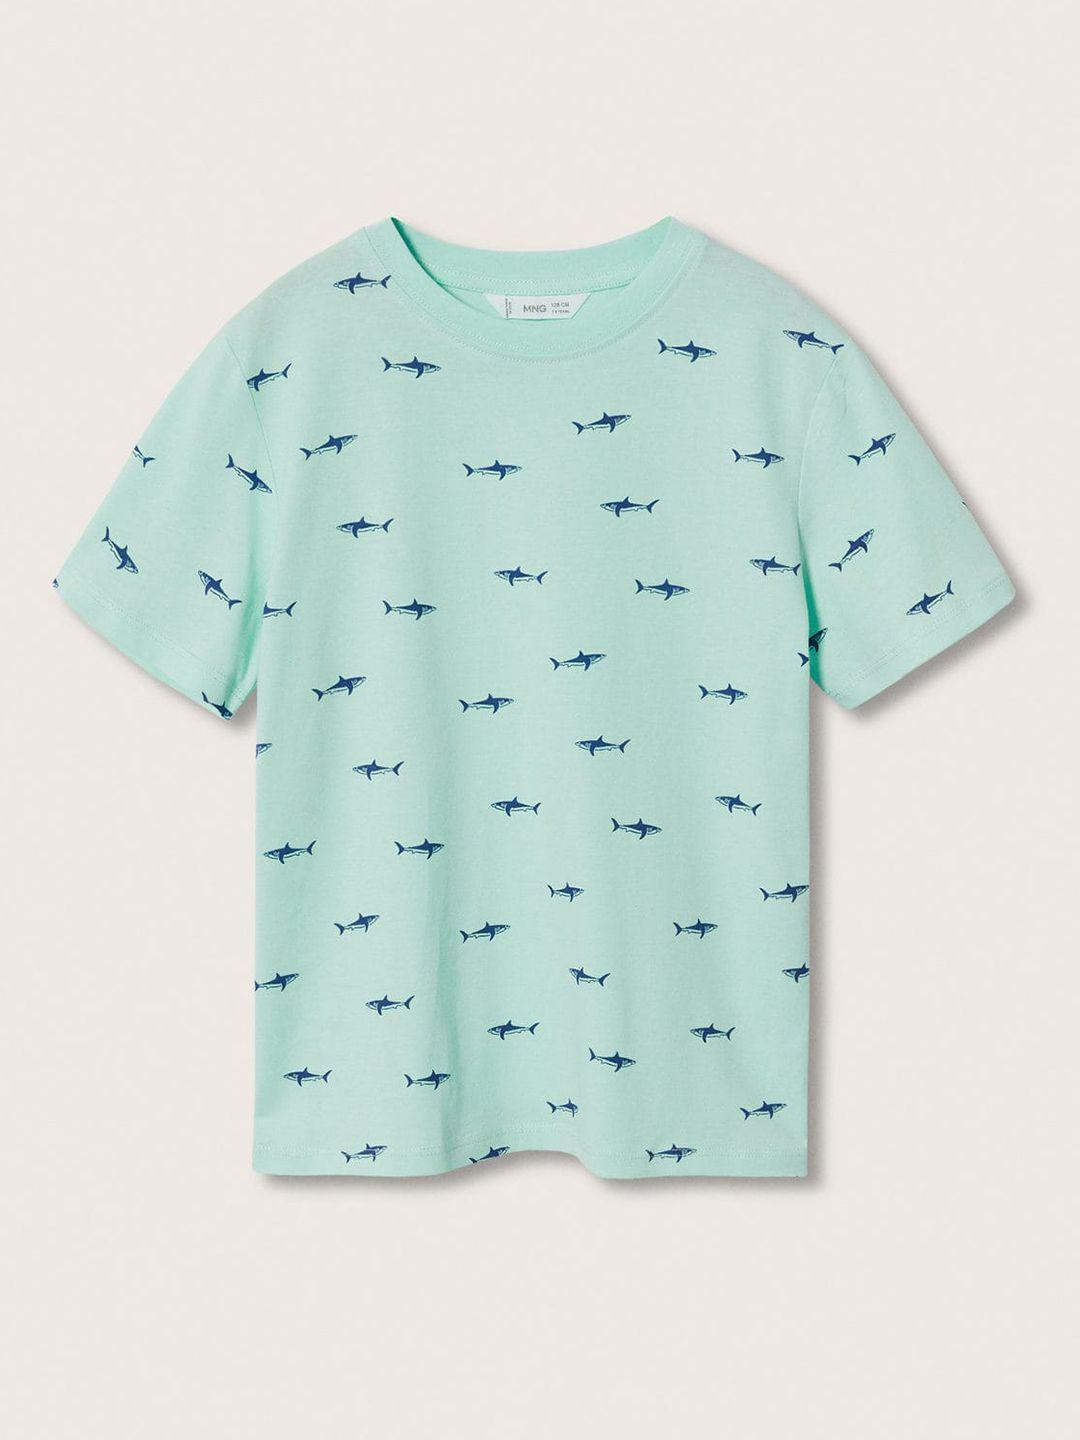 mango kids boys green & blue printed pure cotton sustainable t-shirt